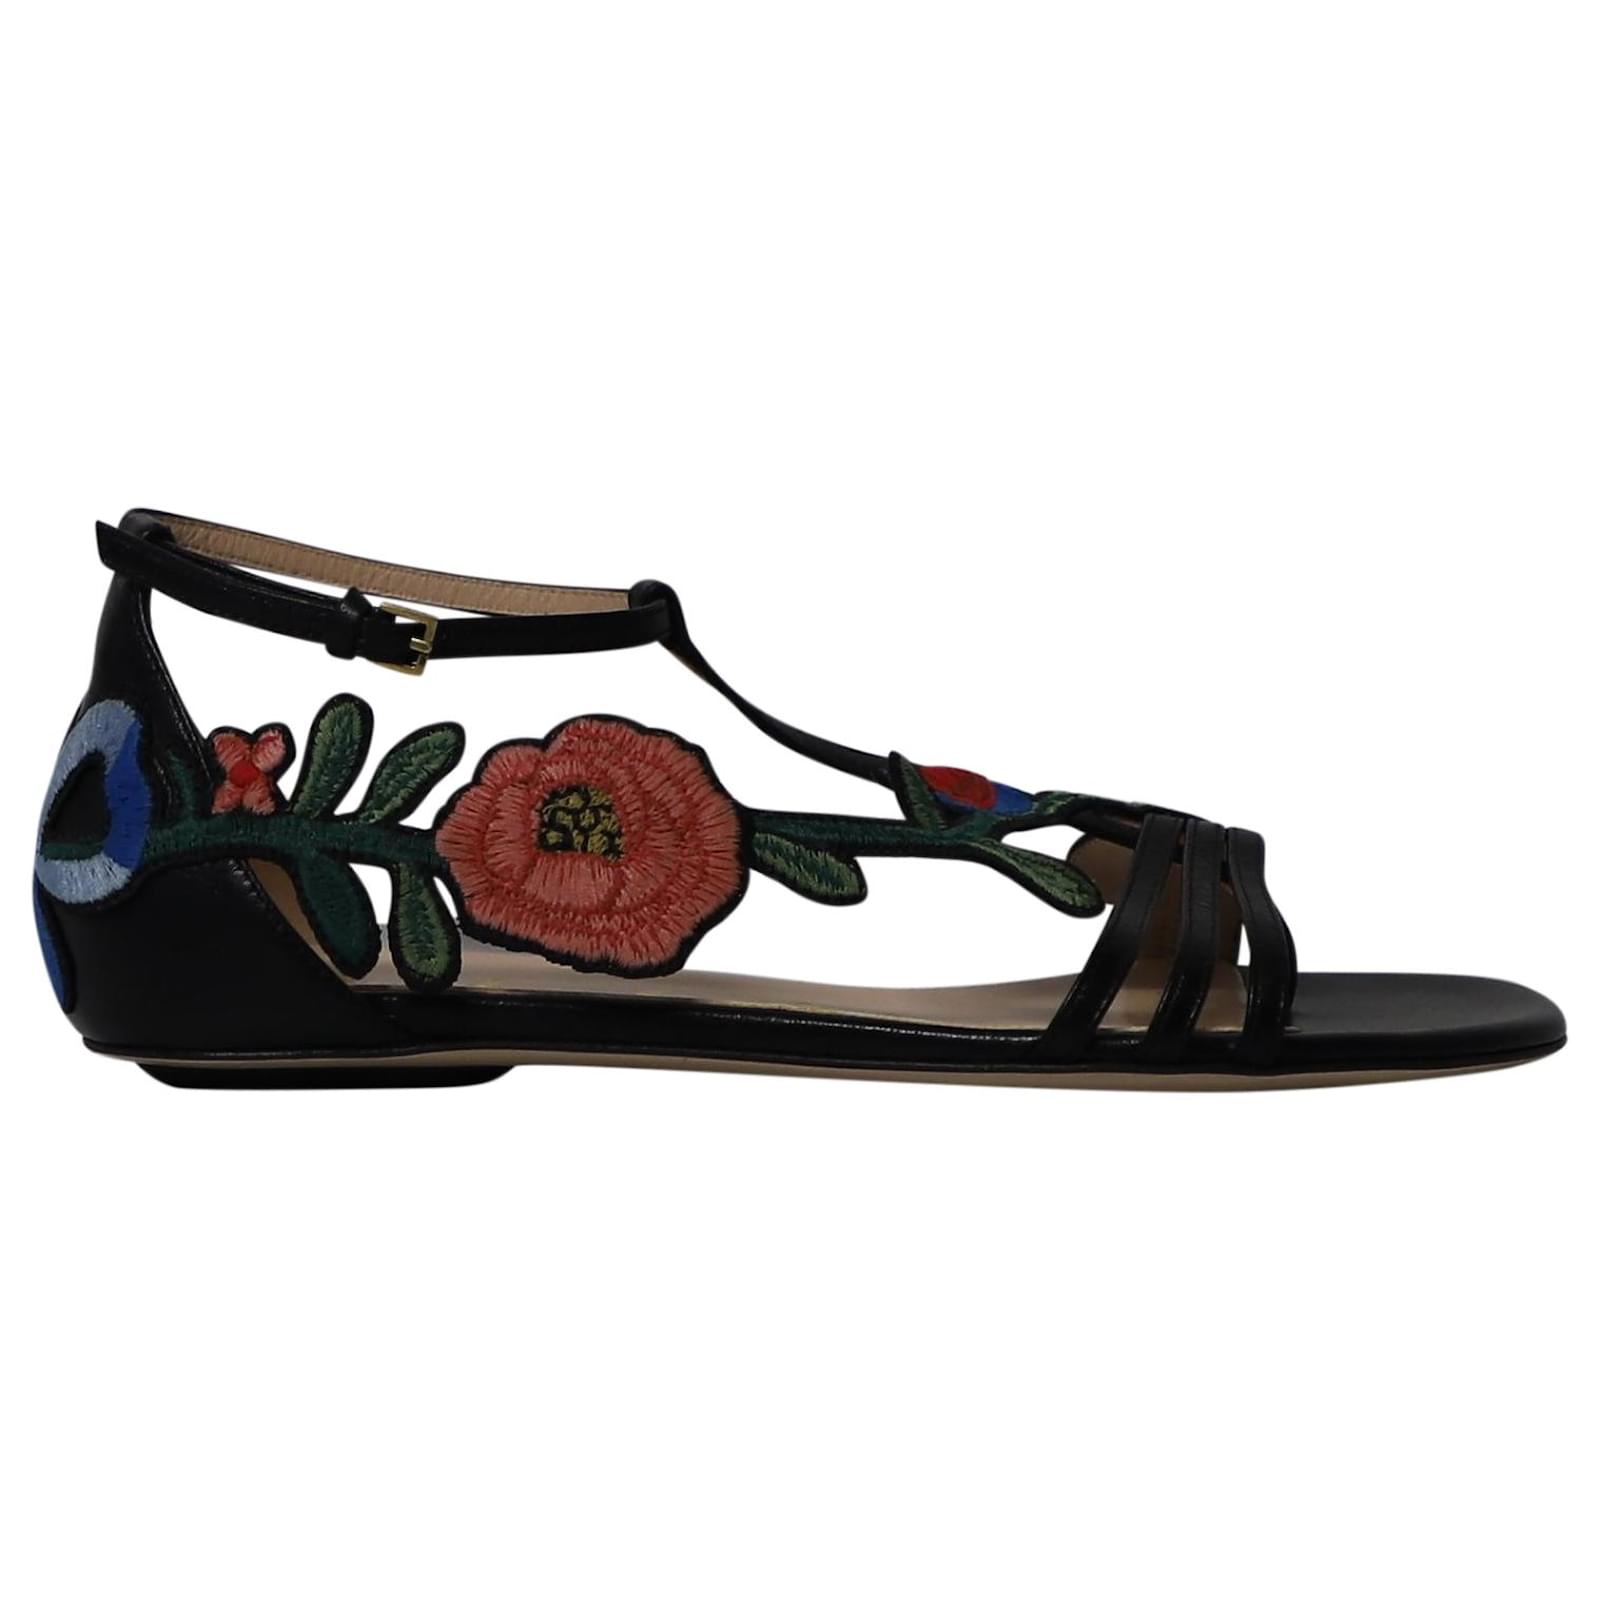 Gucci Ophelia Floral-Embroidered Flat Sandals in Black Leather ref ...